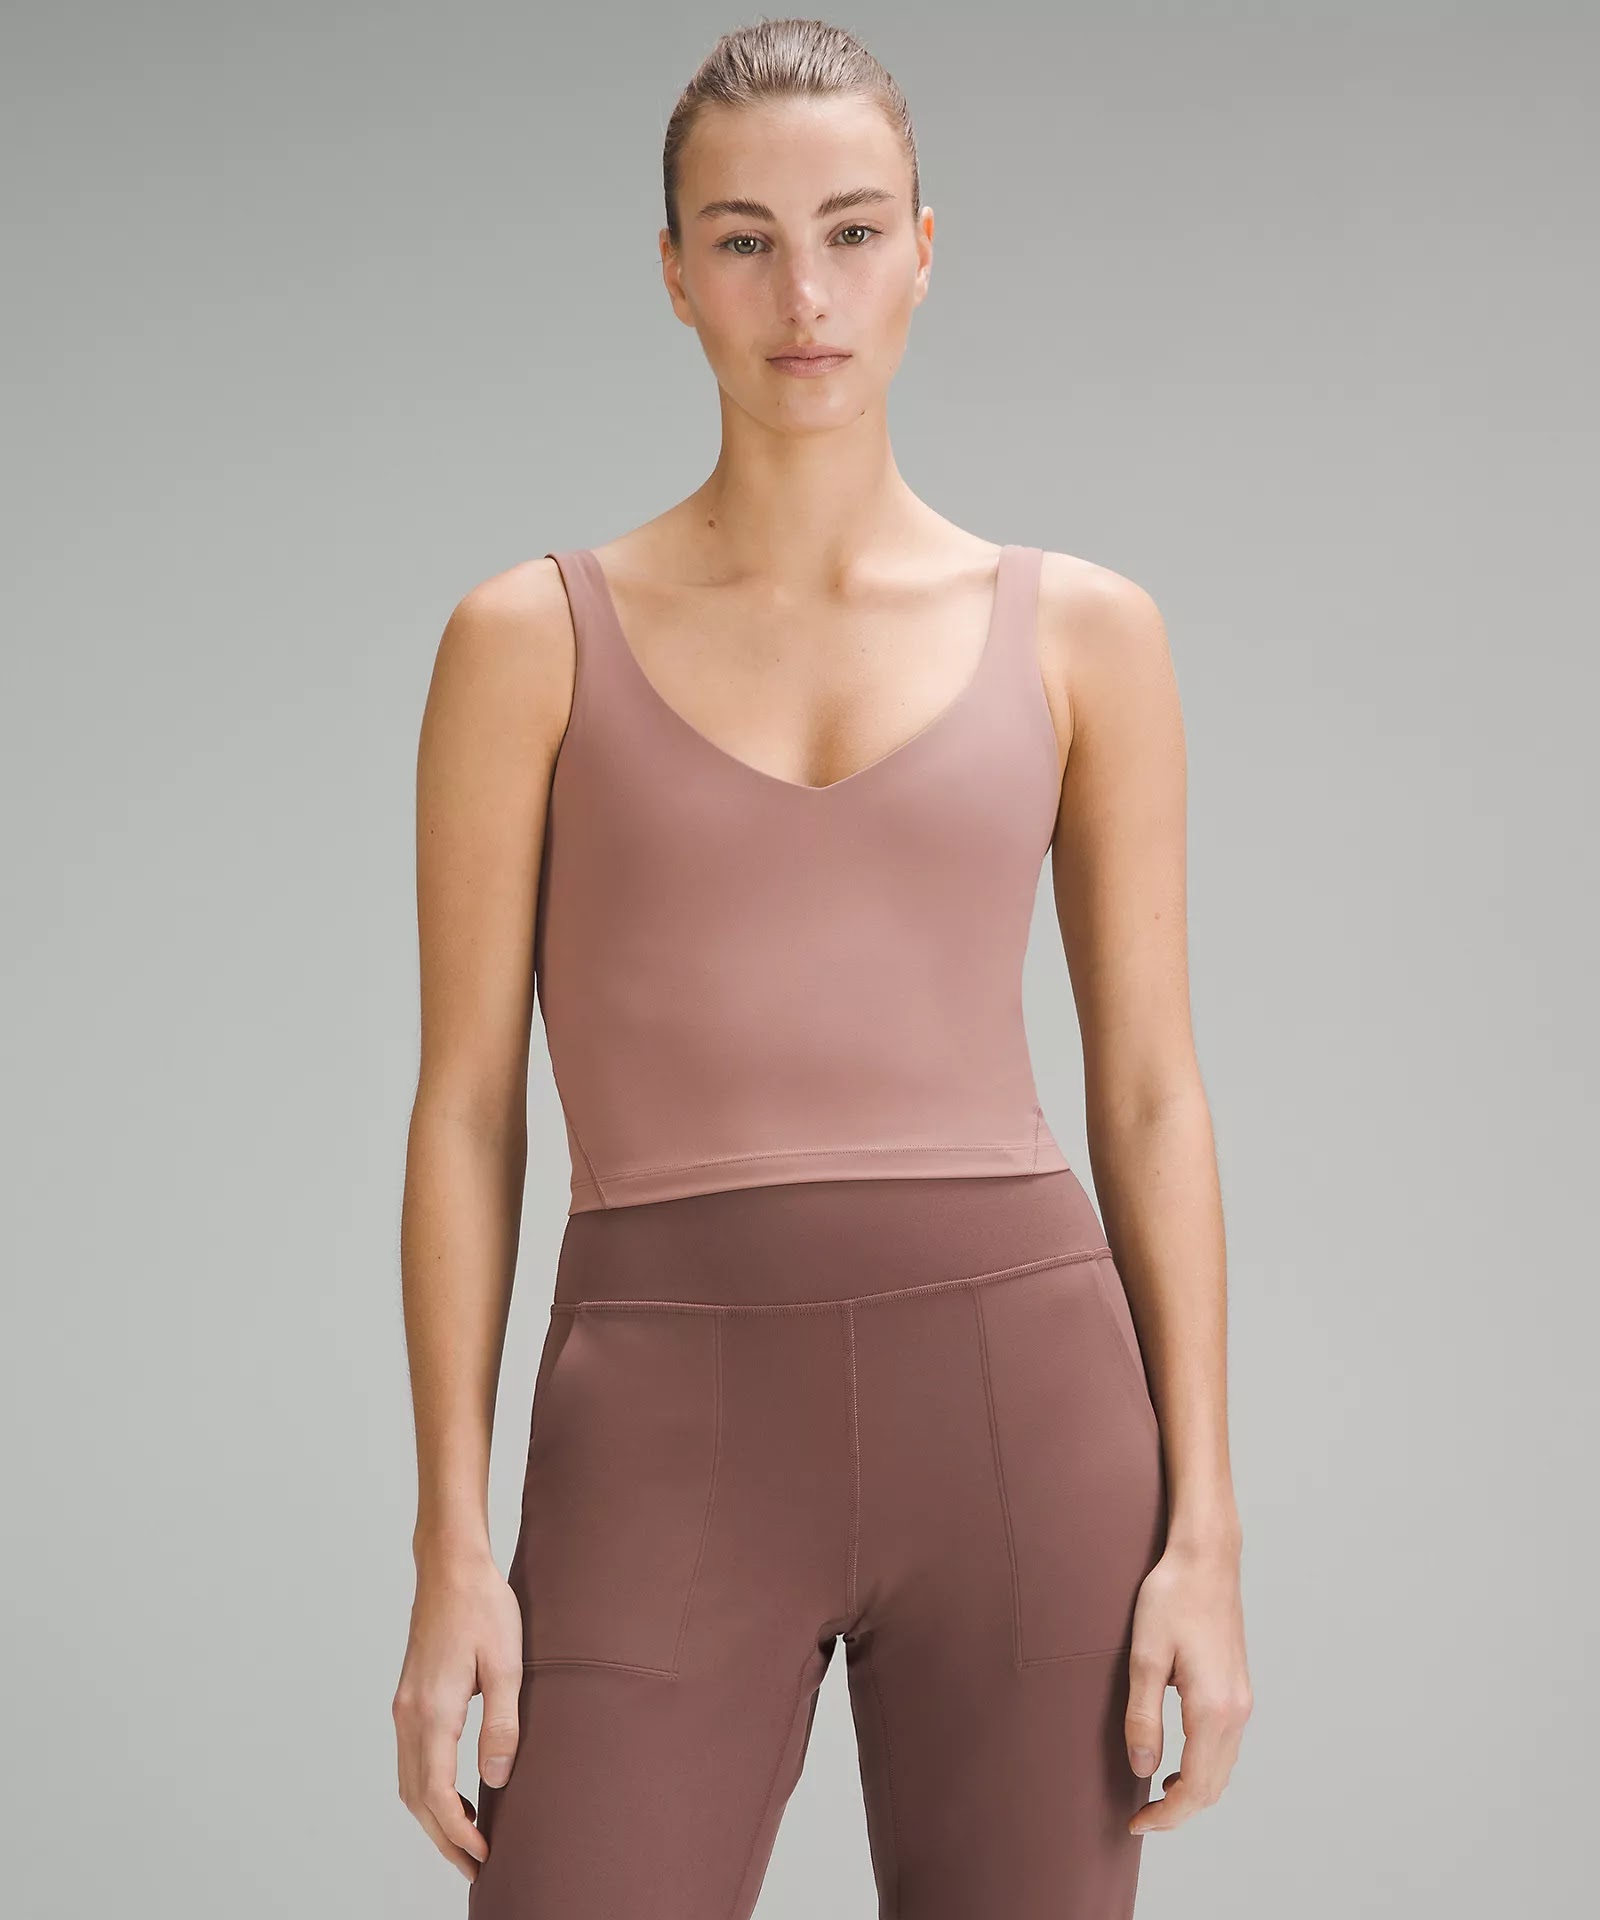 lululemon align size 4 with tags espresso color, Women's - Bottoms, Thunder Bay